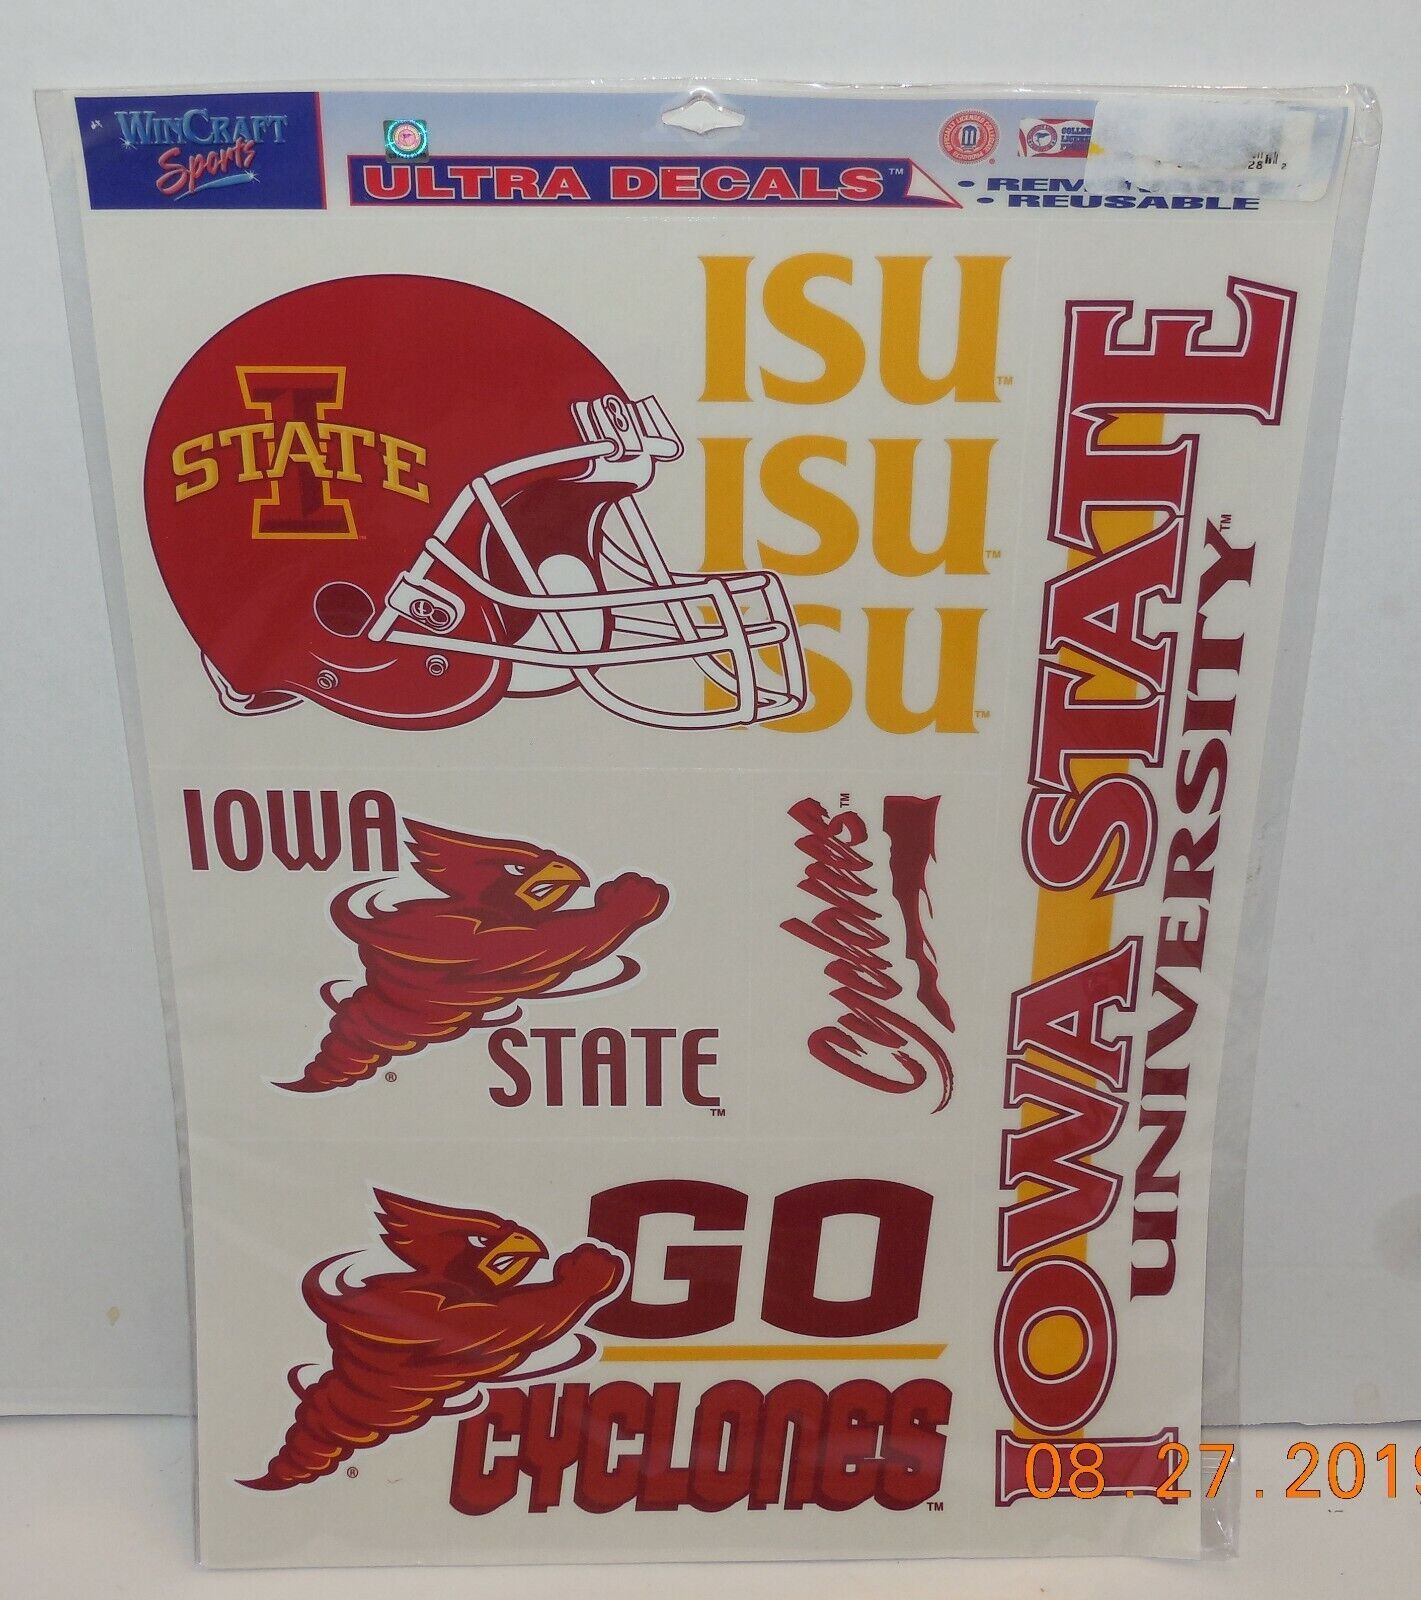 Primary image for Wincraft Iowa State University Cyclones Ultra Decals 11" x 17" NCAA College